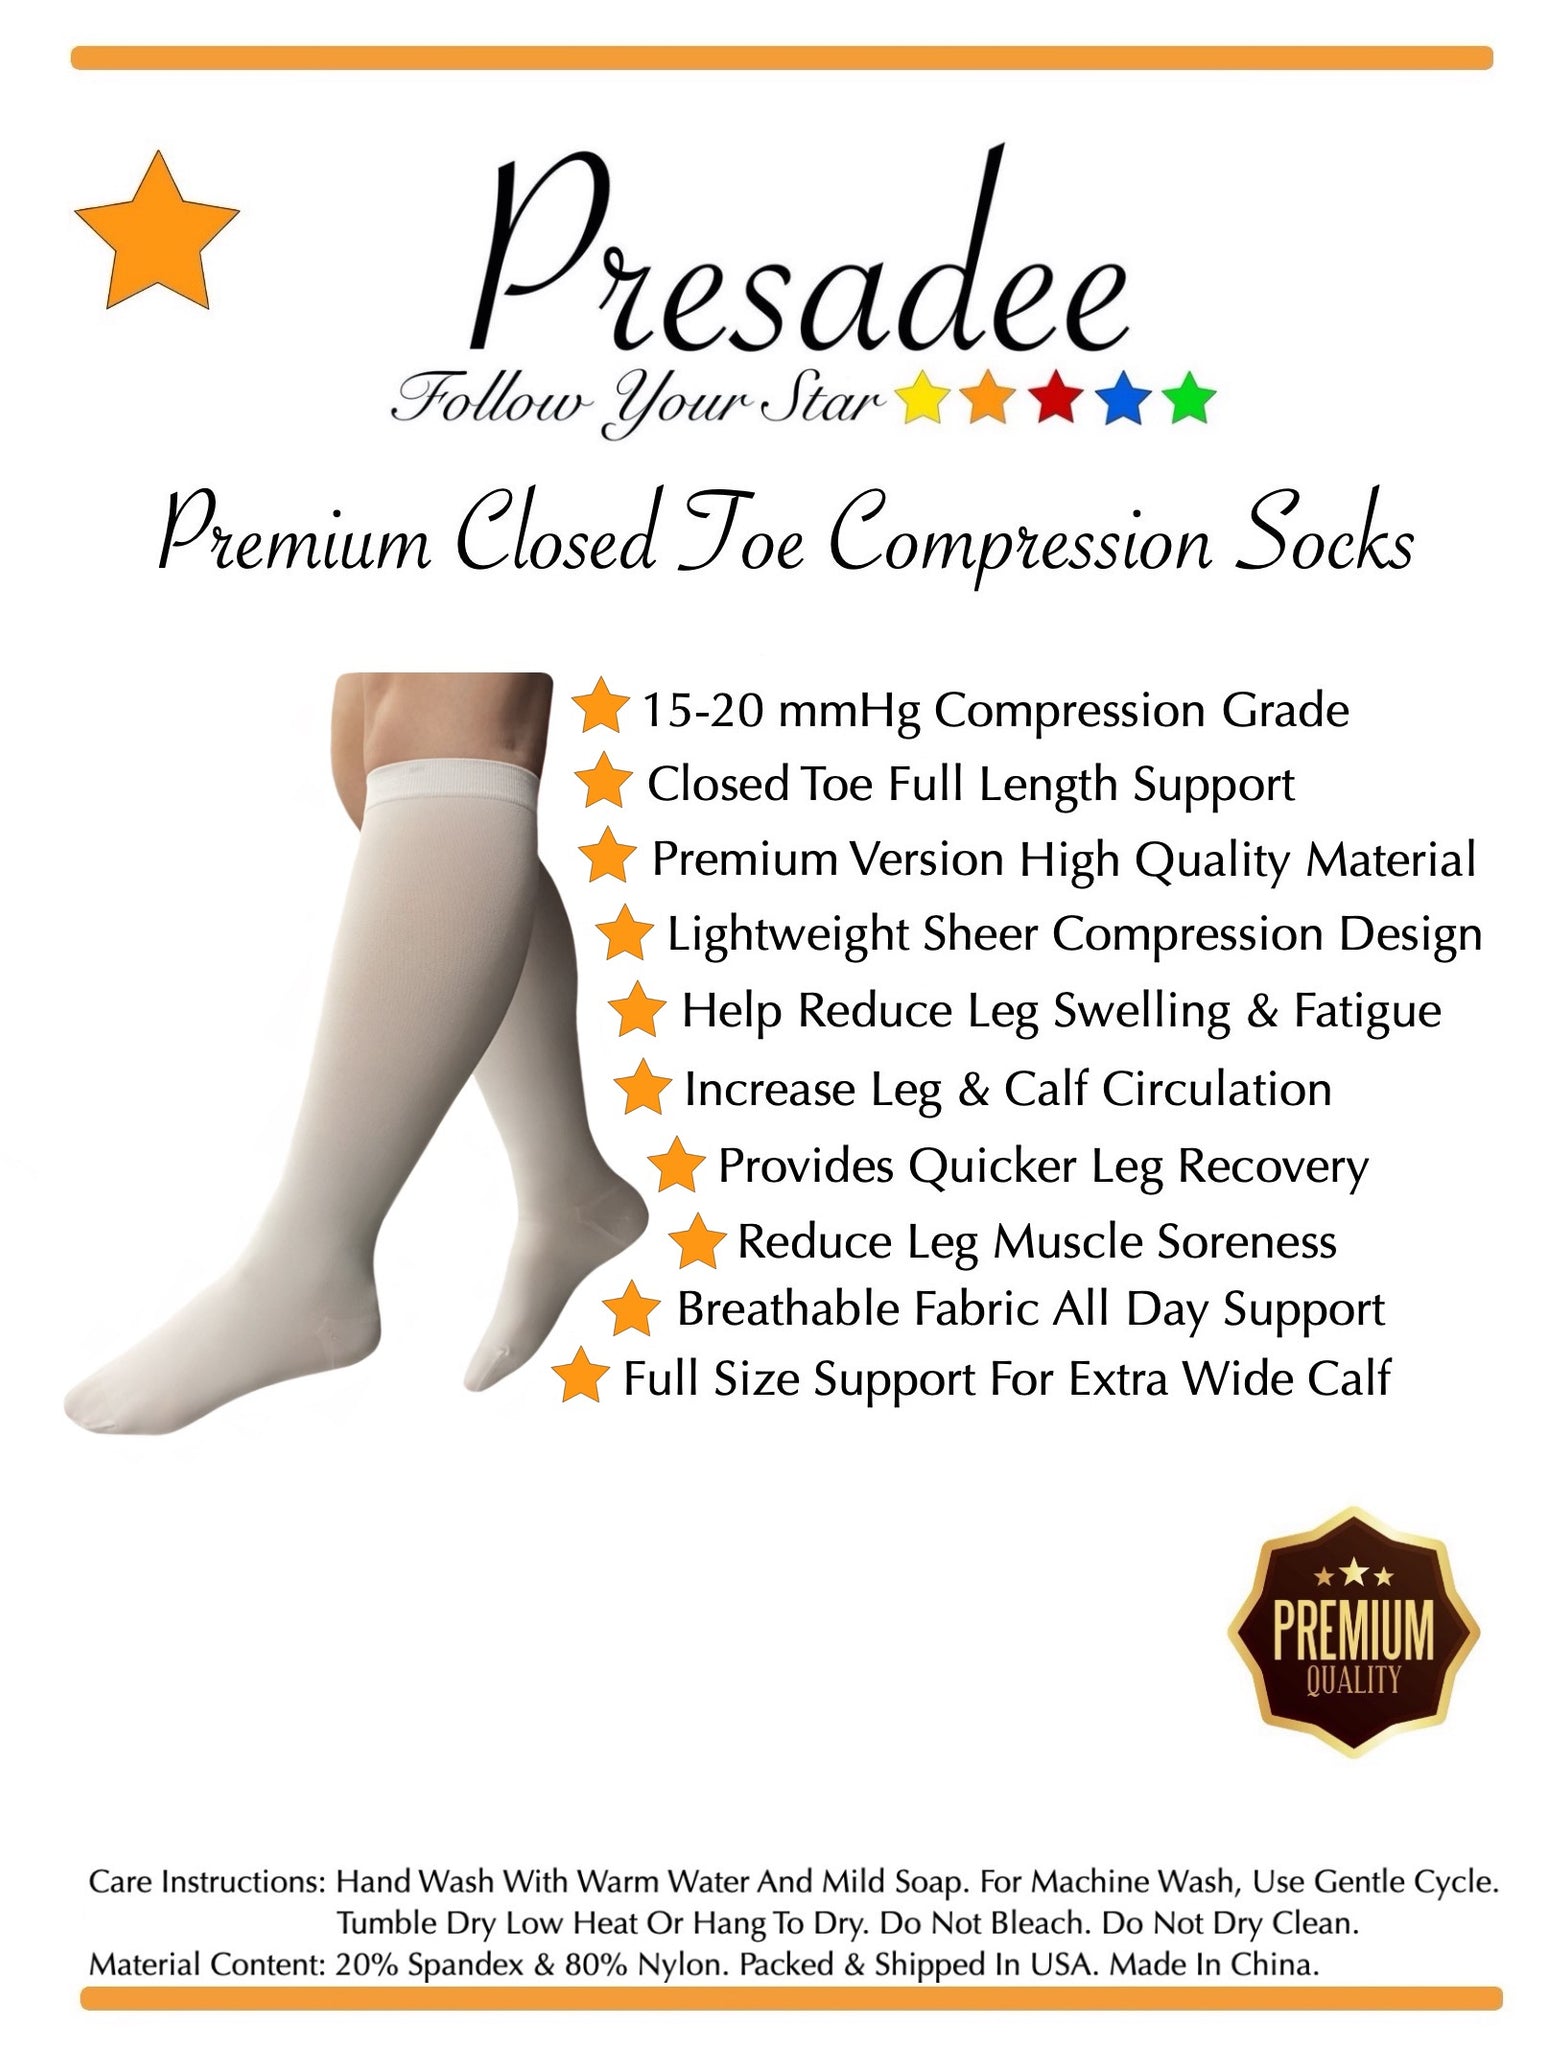 How to put on closed toe compression socks 